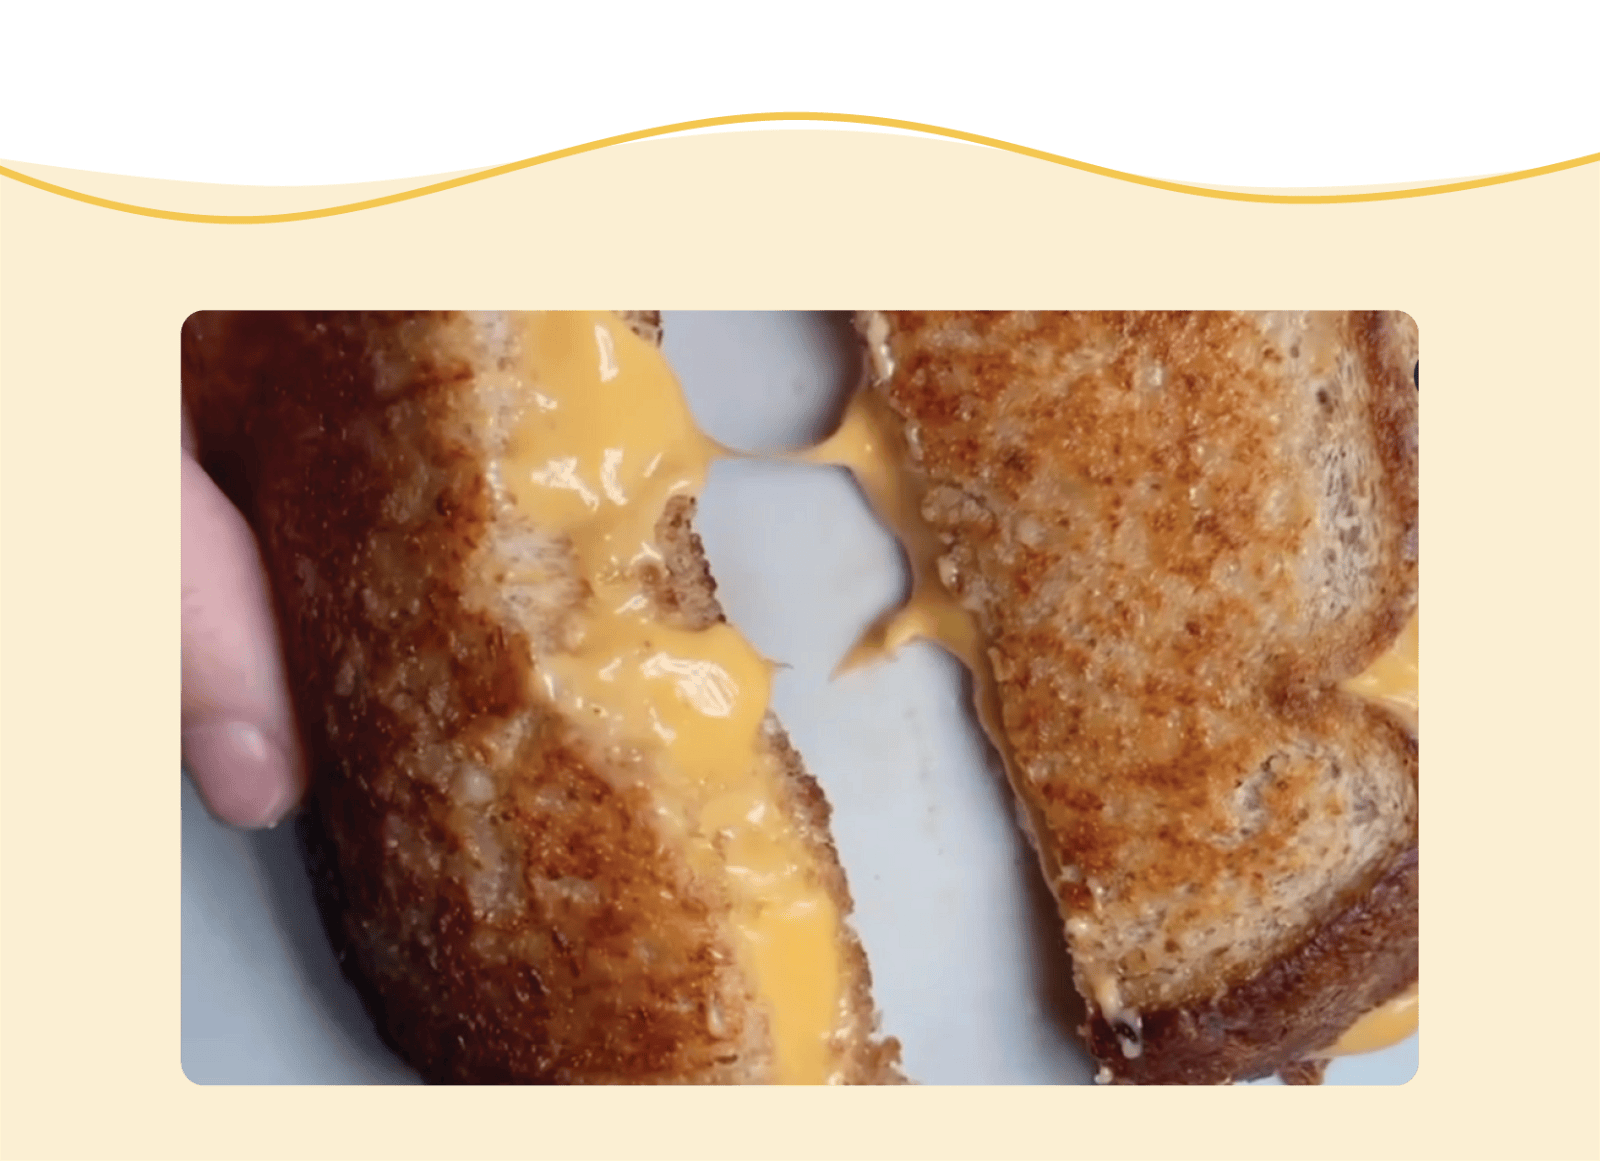 Grilled Cheese made with Mayo